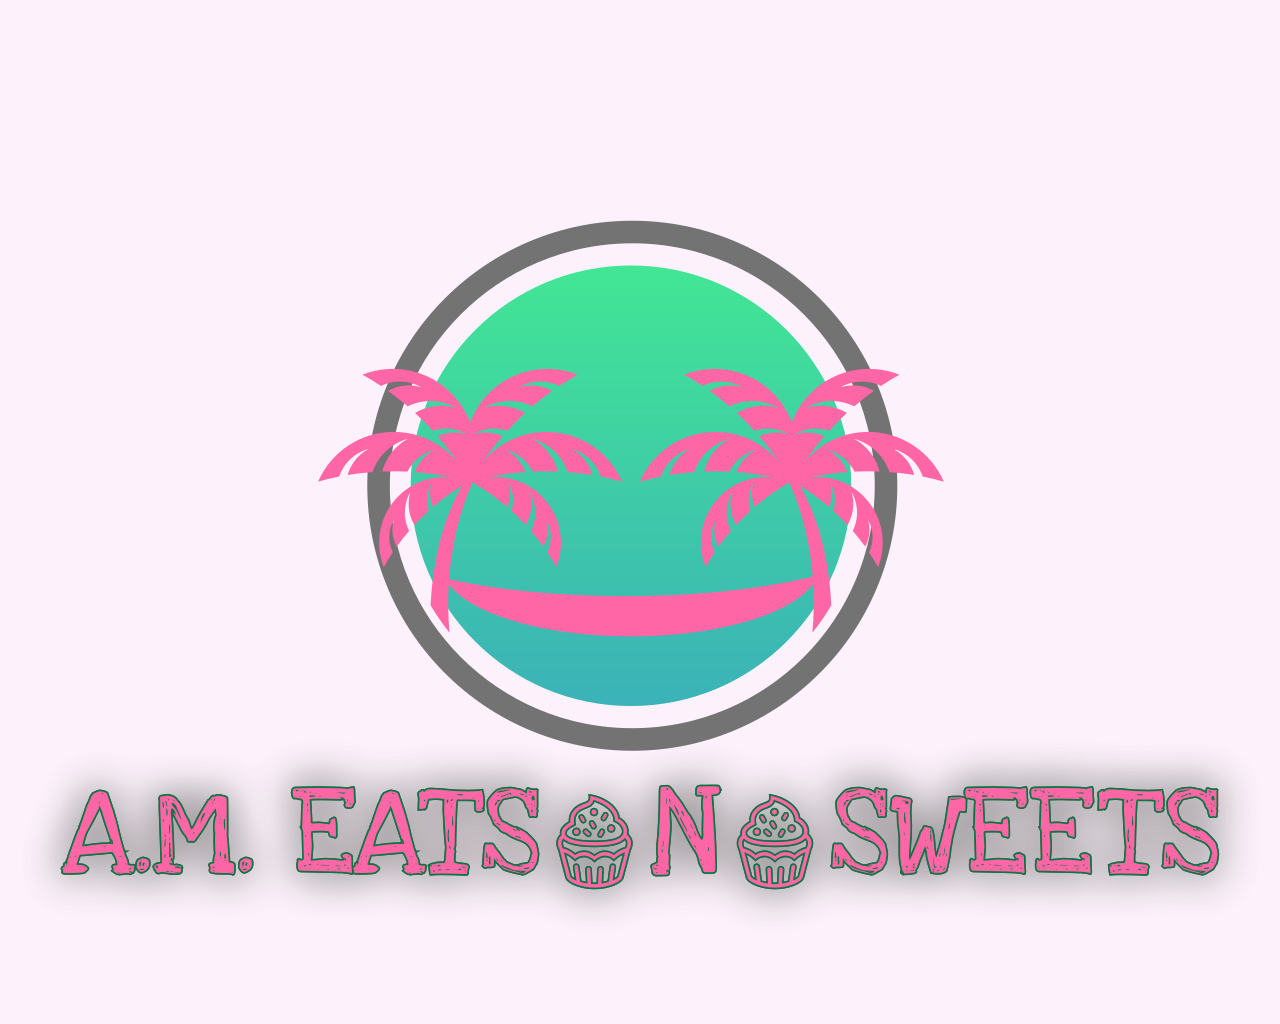 AM Eats N Sweets's web page